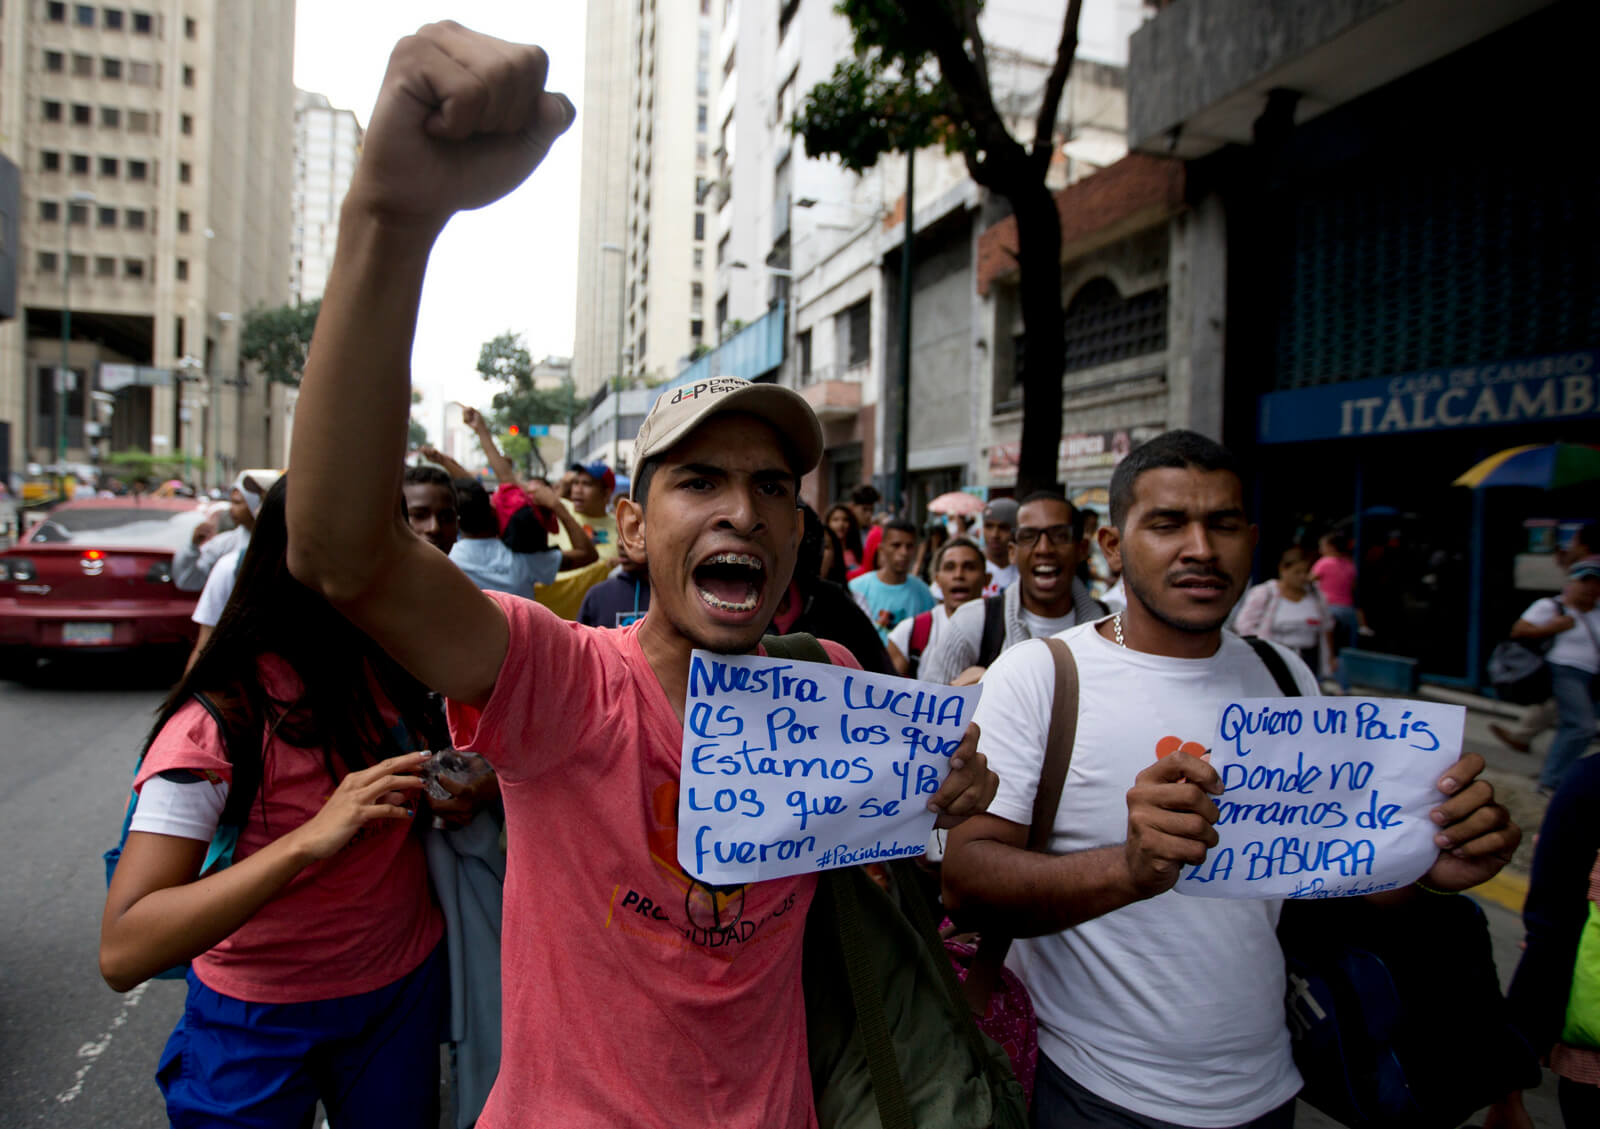 Demonstrators hold signs that reads in Spanish "Our fight is for those of us who stayed and those who left," left, and "I want a country where we don't eat from the garbage" as they shout slogans against Venezuela's President Nicolas Maduro in downtown Caracas, Venezuela, July 18, 2018 Fernando Llano | AP